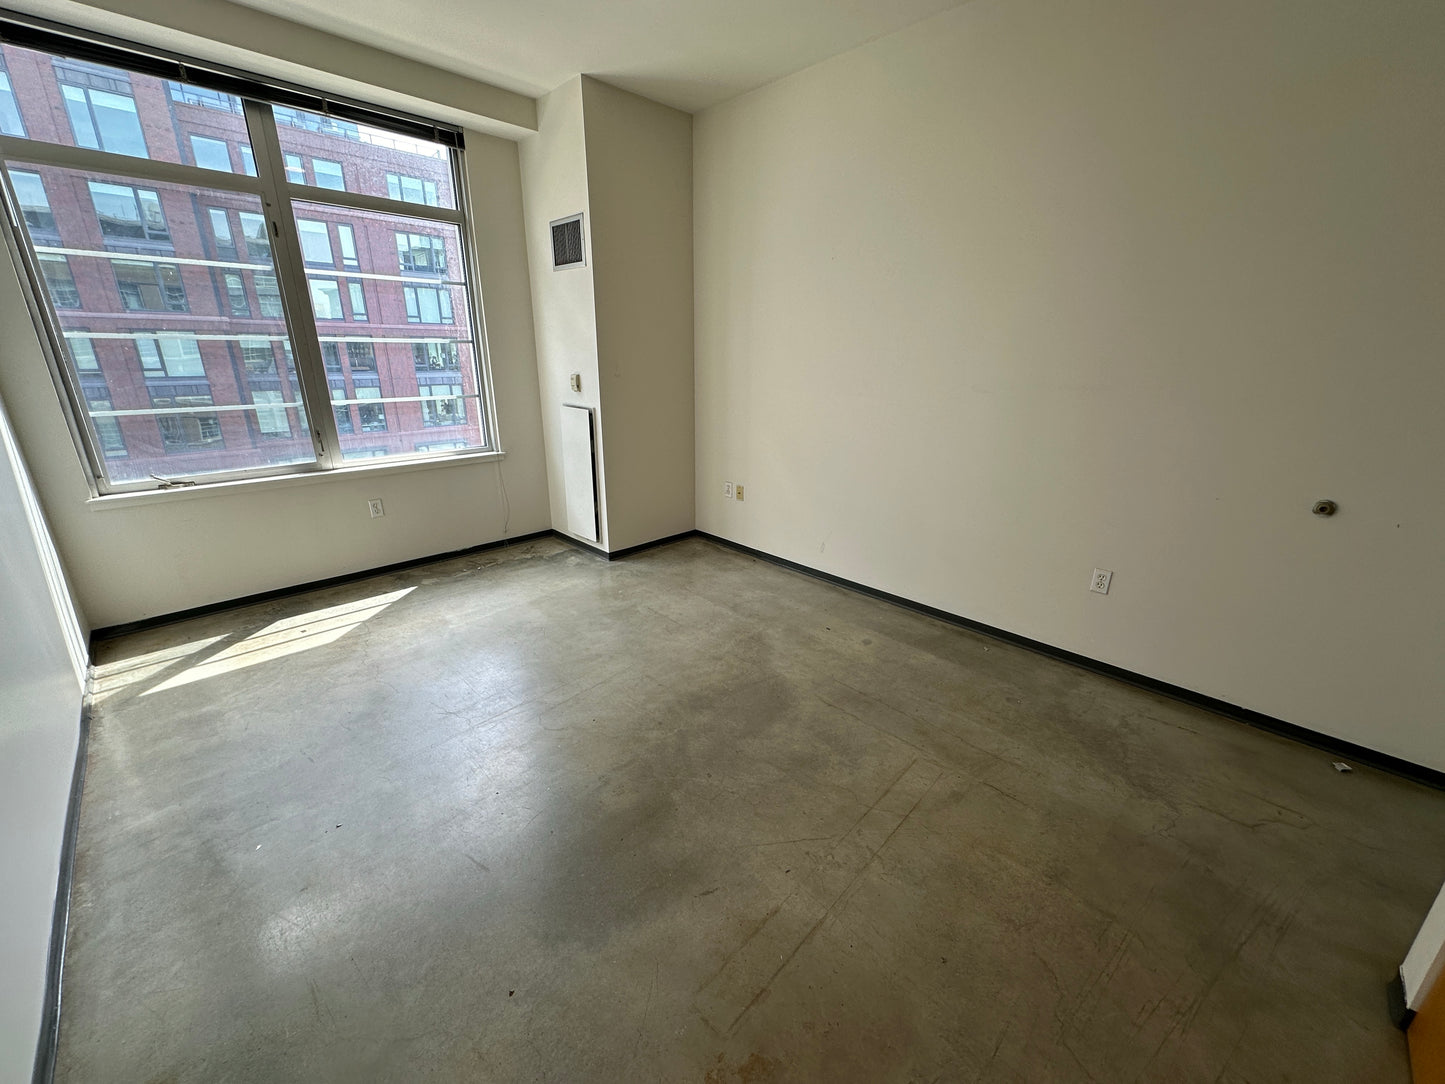 APPLICATION PENDING $3,150 / 1br - 780ft2 - ➽Airy South End 1 Bedroom Available Now! No Broker Fee! Pet-Friendly! (South End)